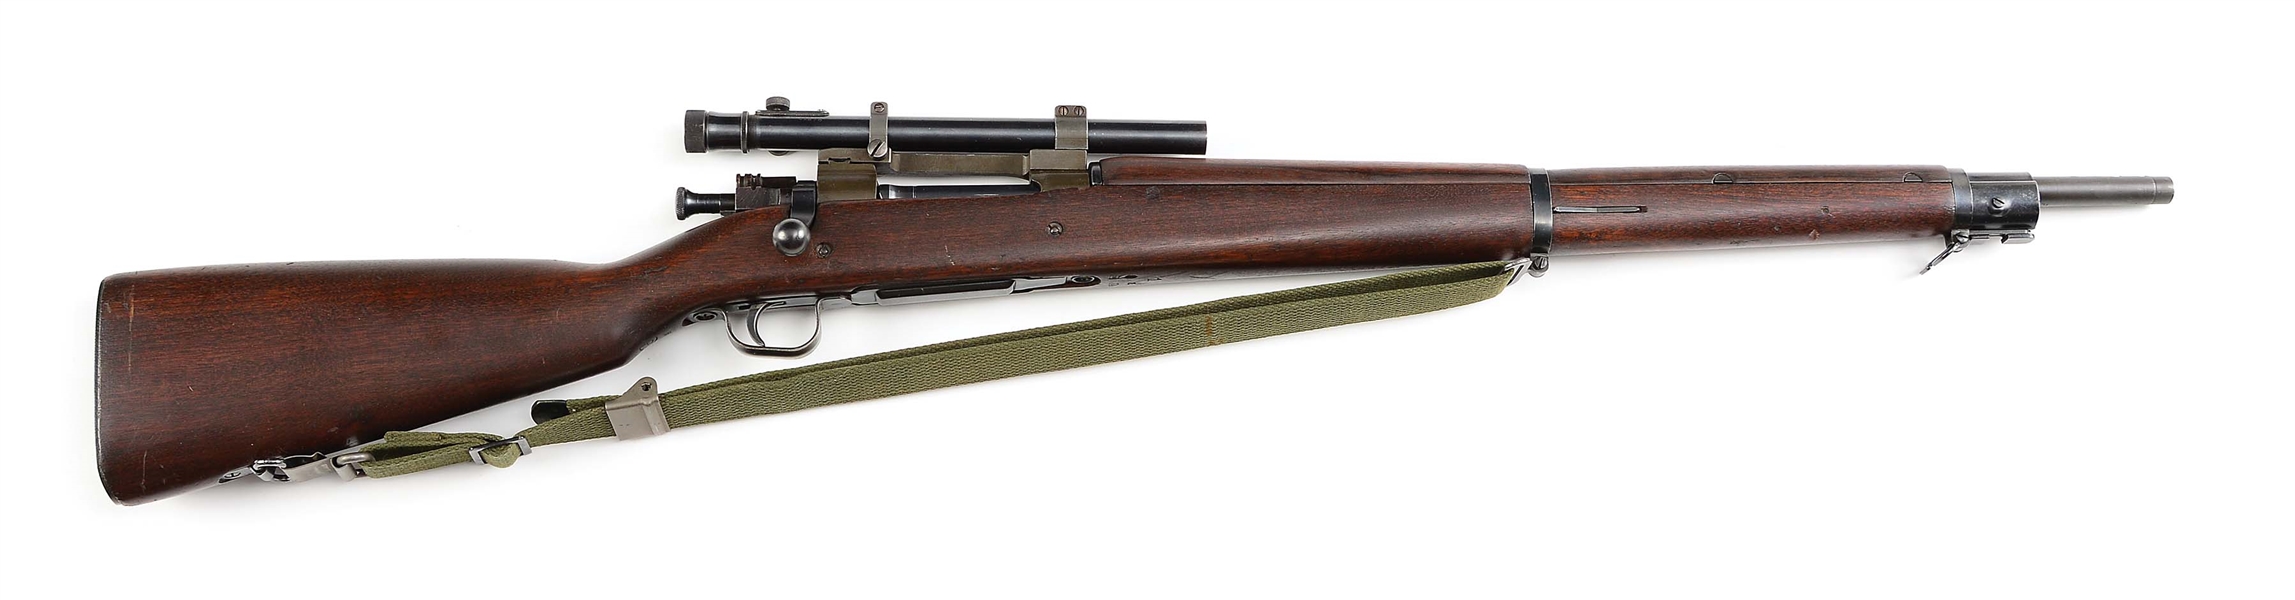 (C) OUTSTANDING "Z" SERIES REMINGTON 1903-A4 SNIPER RIFLE WITH M73B1 SCOPE.